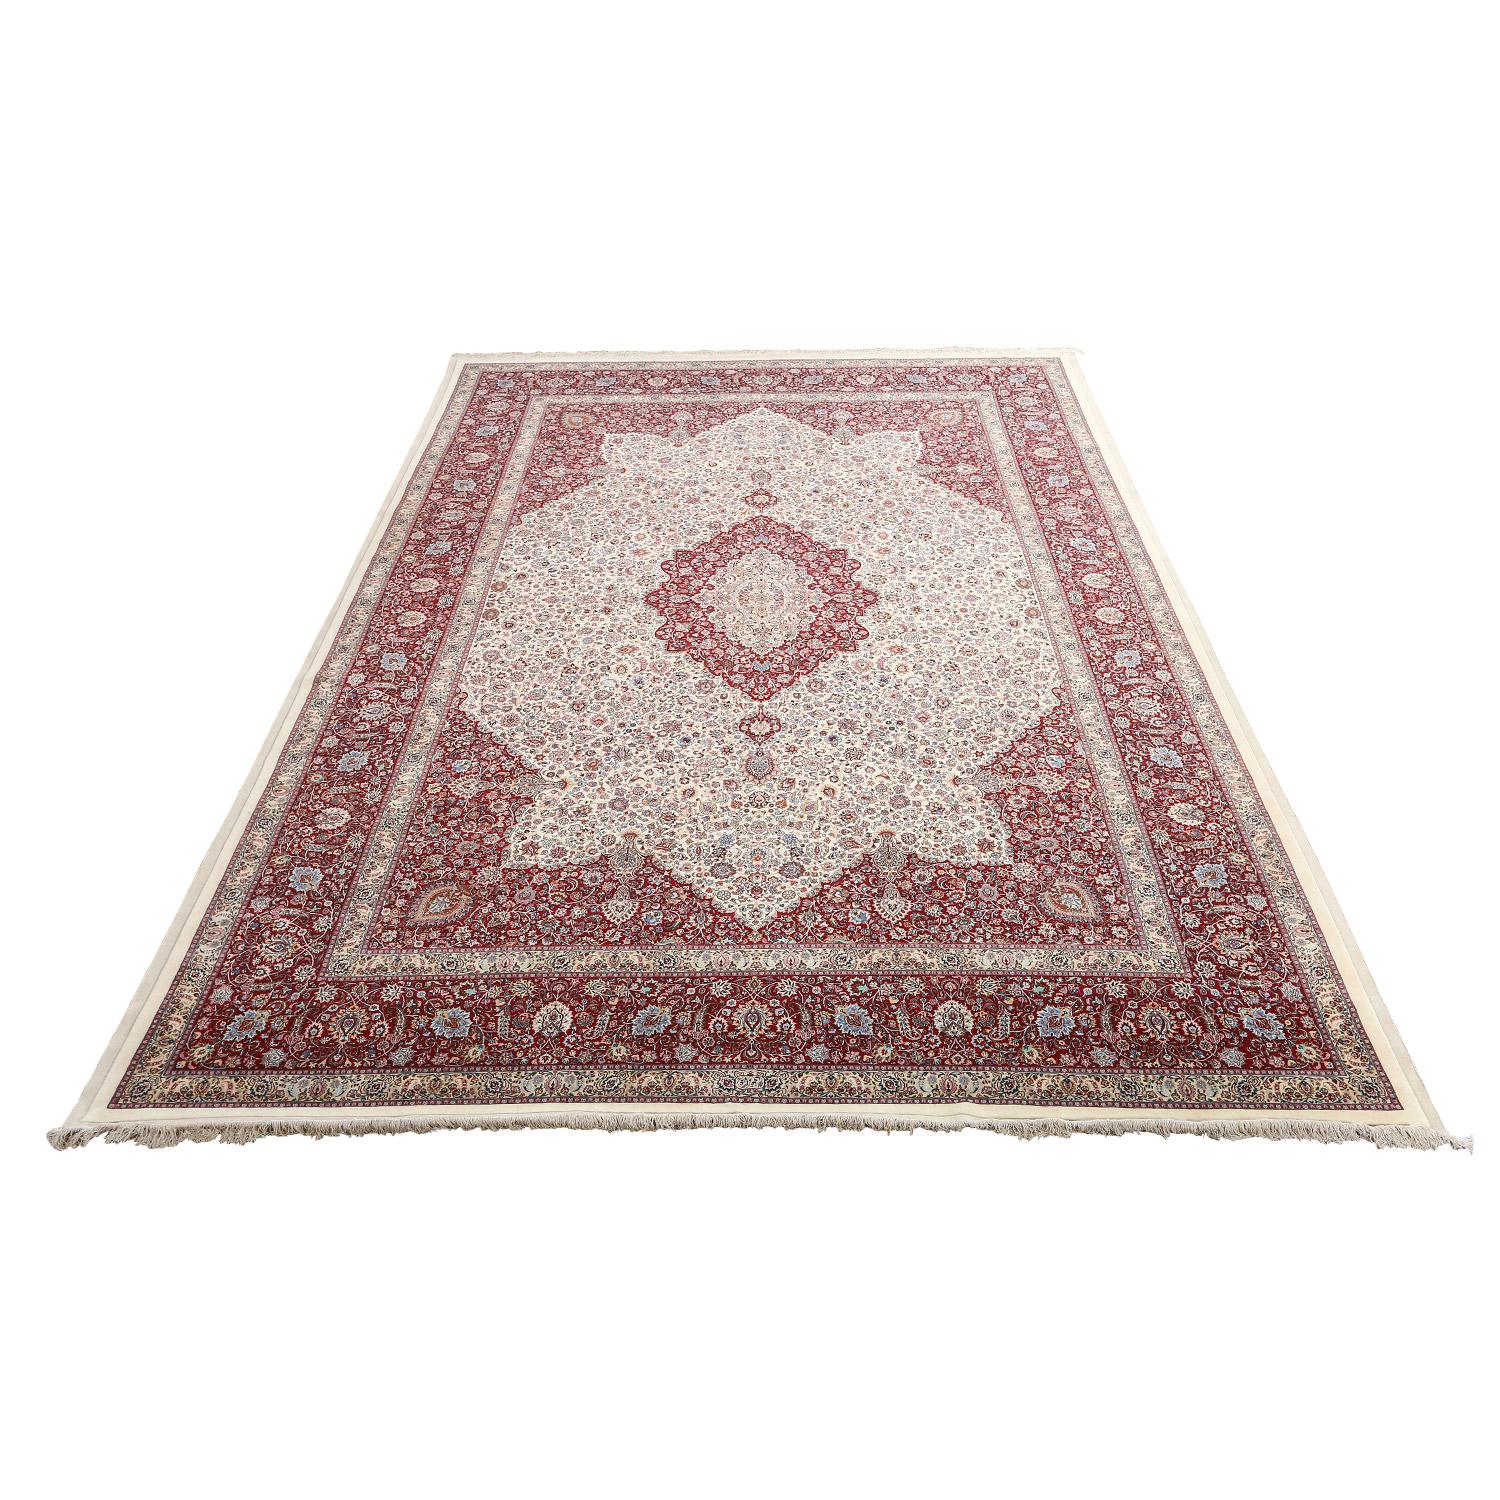 This vintage Mashad Amoghli rug is an extraordinary masterpiece, exuding timeless elegance and craftsmanship. Measuring an impressive 17 feet 2 inches by 11 feet 7 inches, and handmade with 1000 knots per inch, is a substantial work of art that will